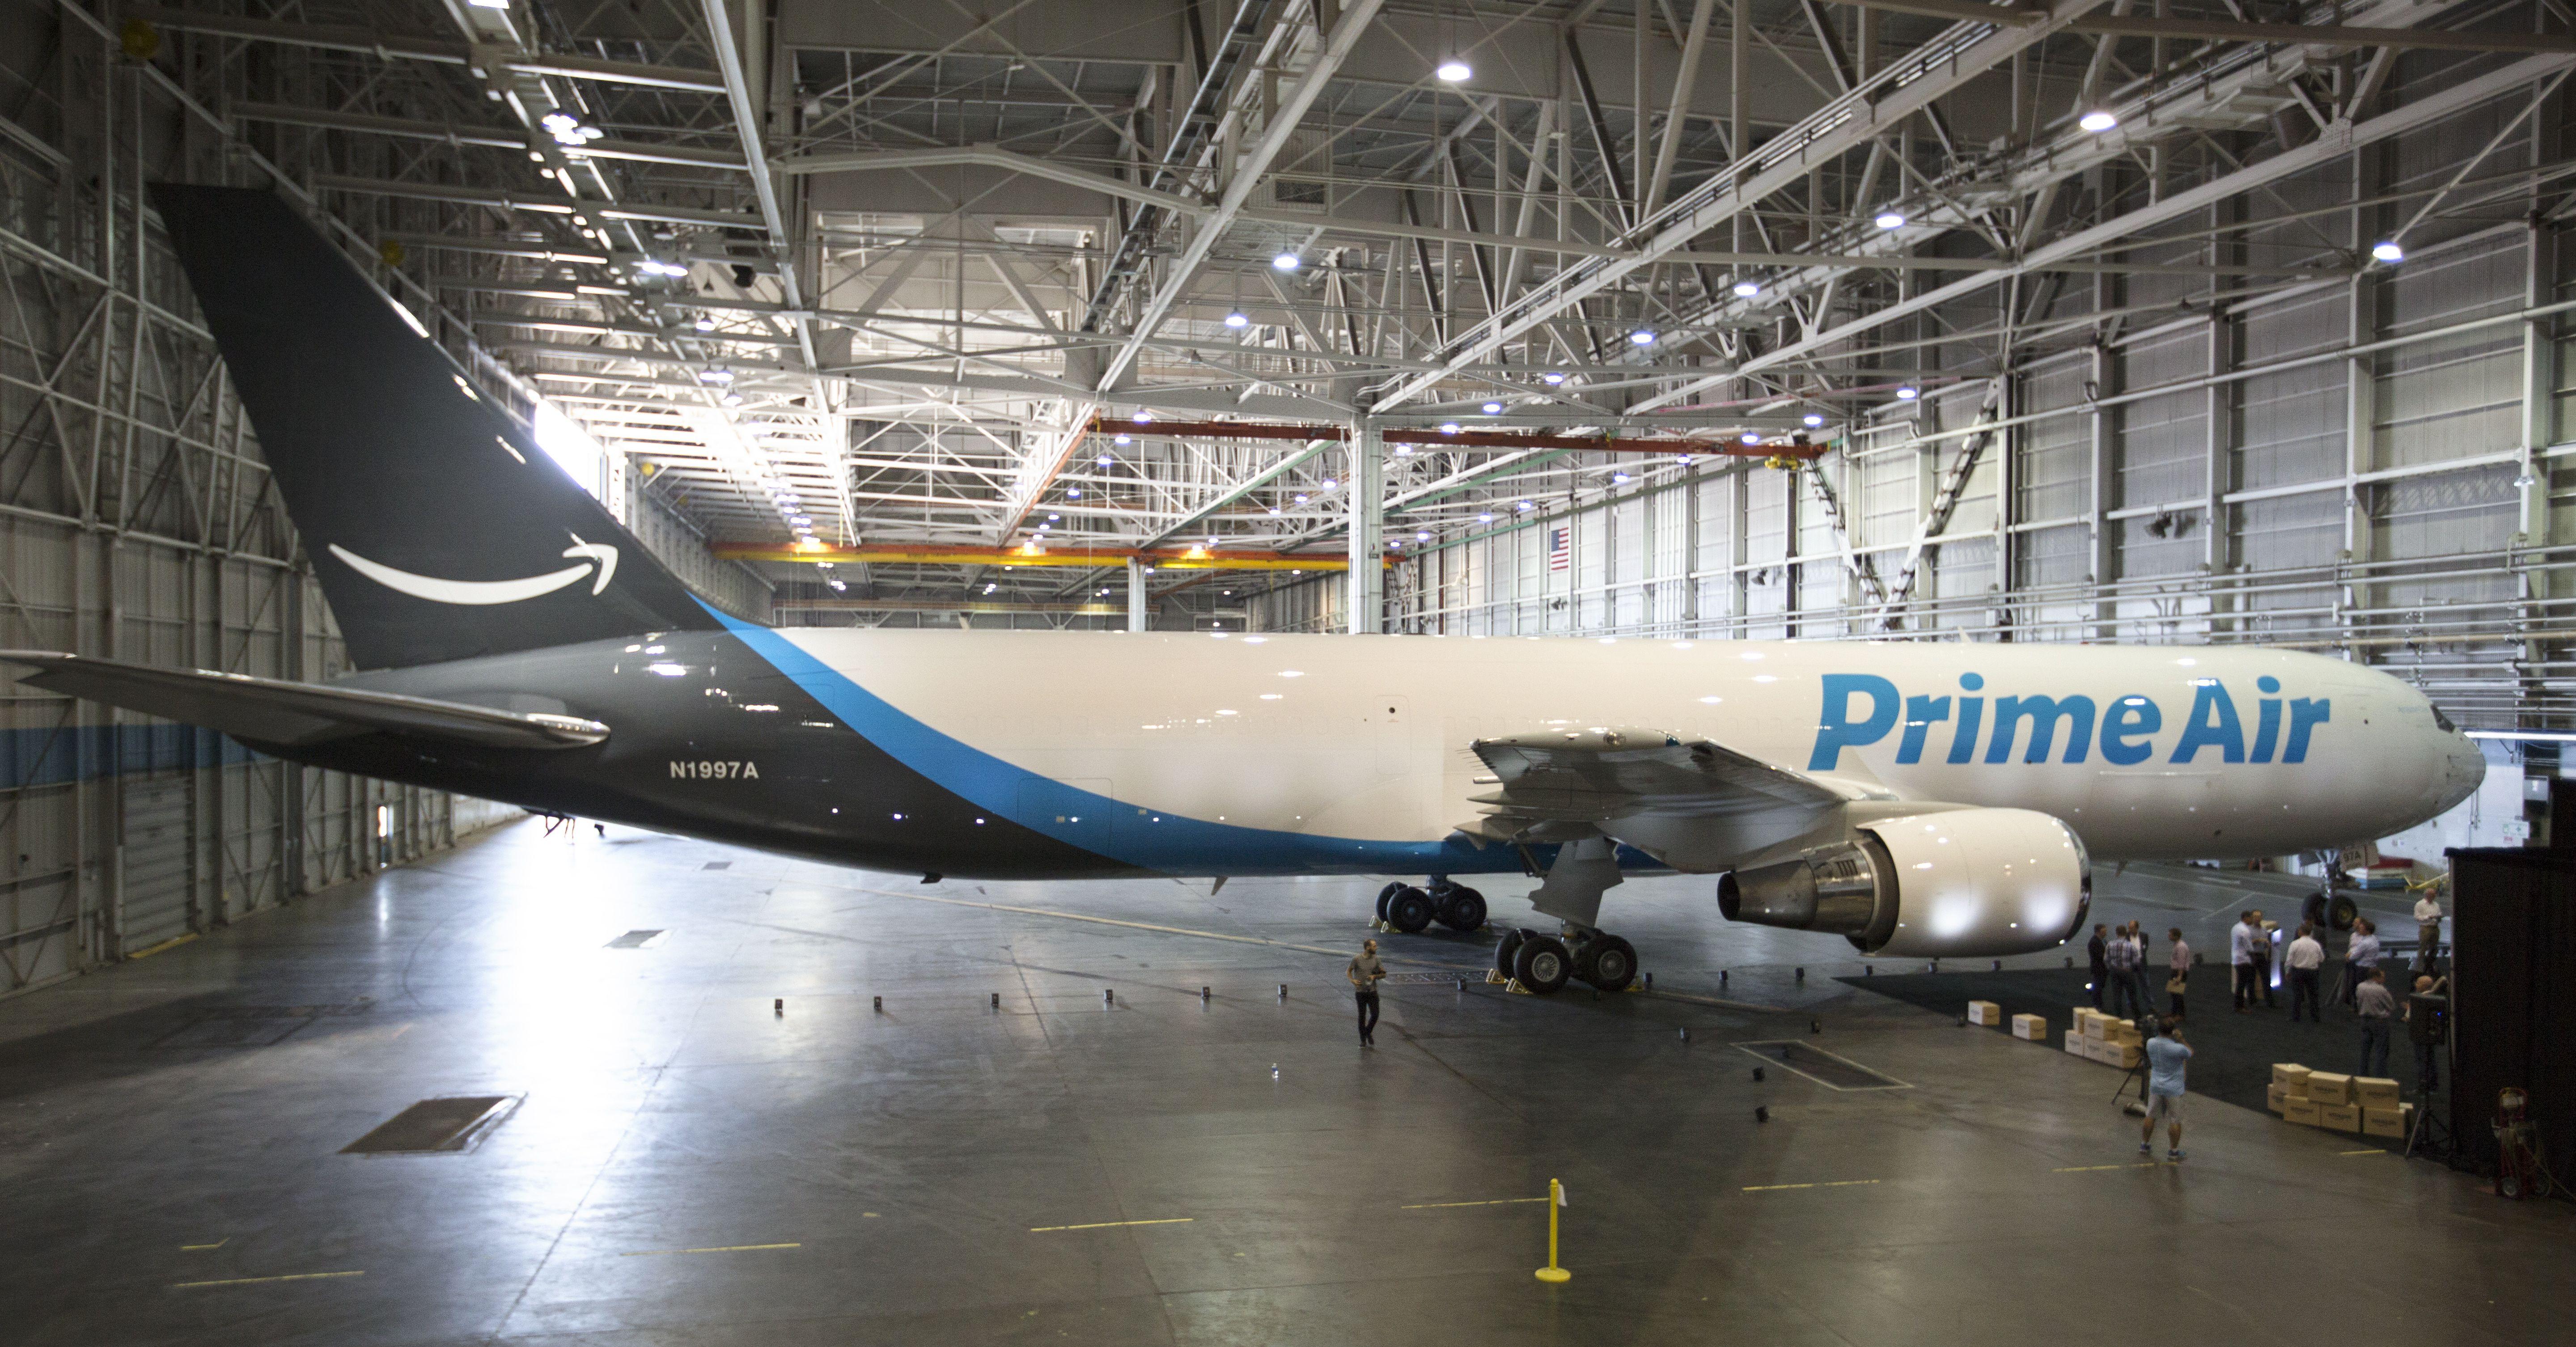 Amazon Prime Air Logo - Amazon's Prime Air Brand Is on Cargo Planes Before Delivery Drones ...